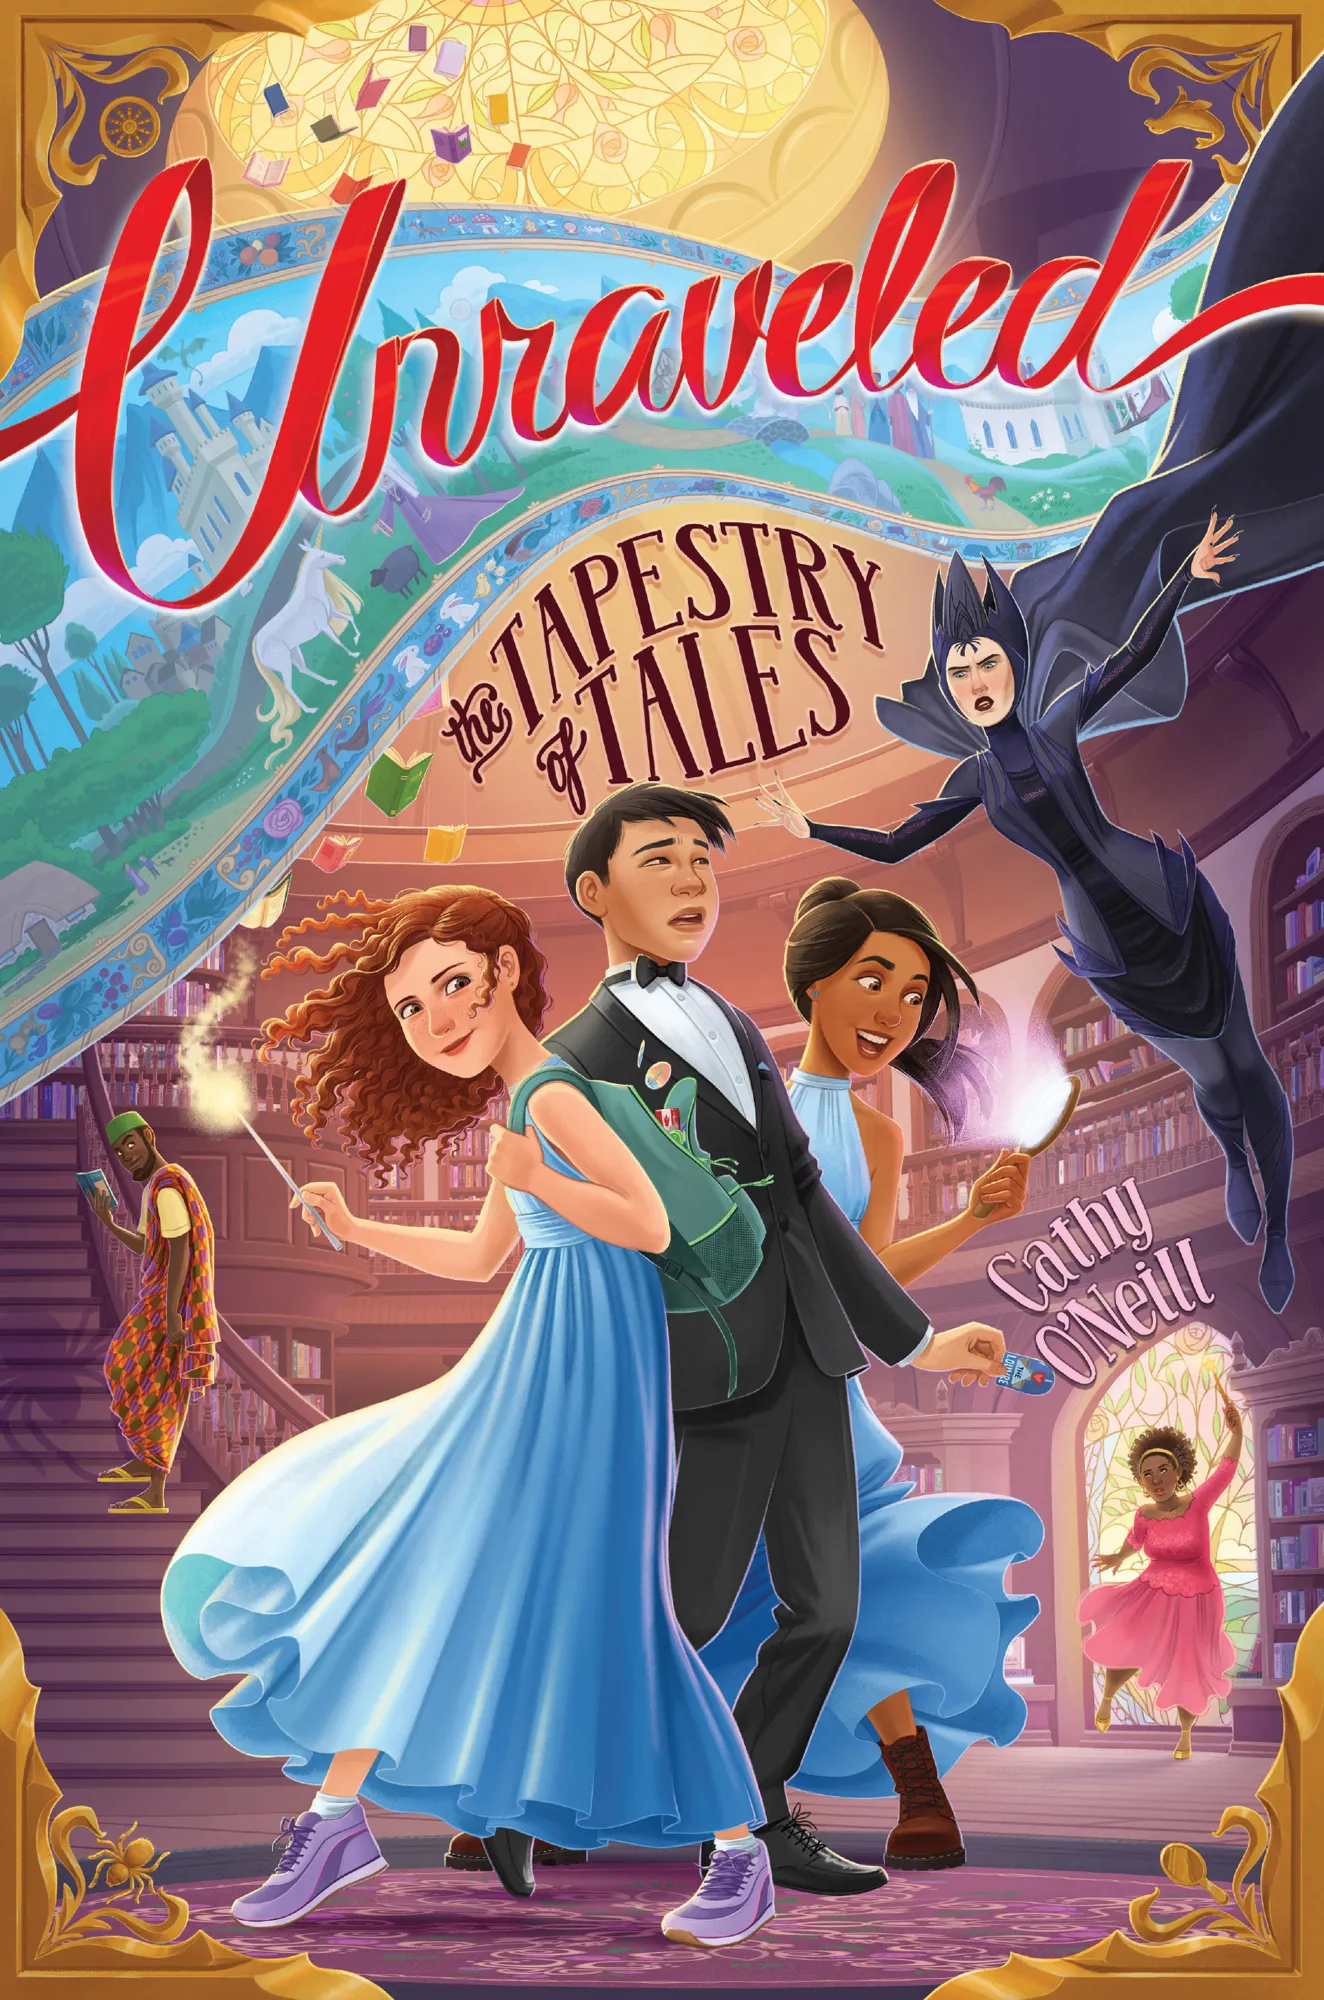 The Tapestry of Tales (Unraveled #2)